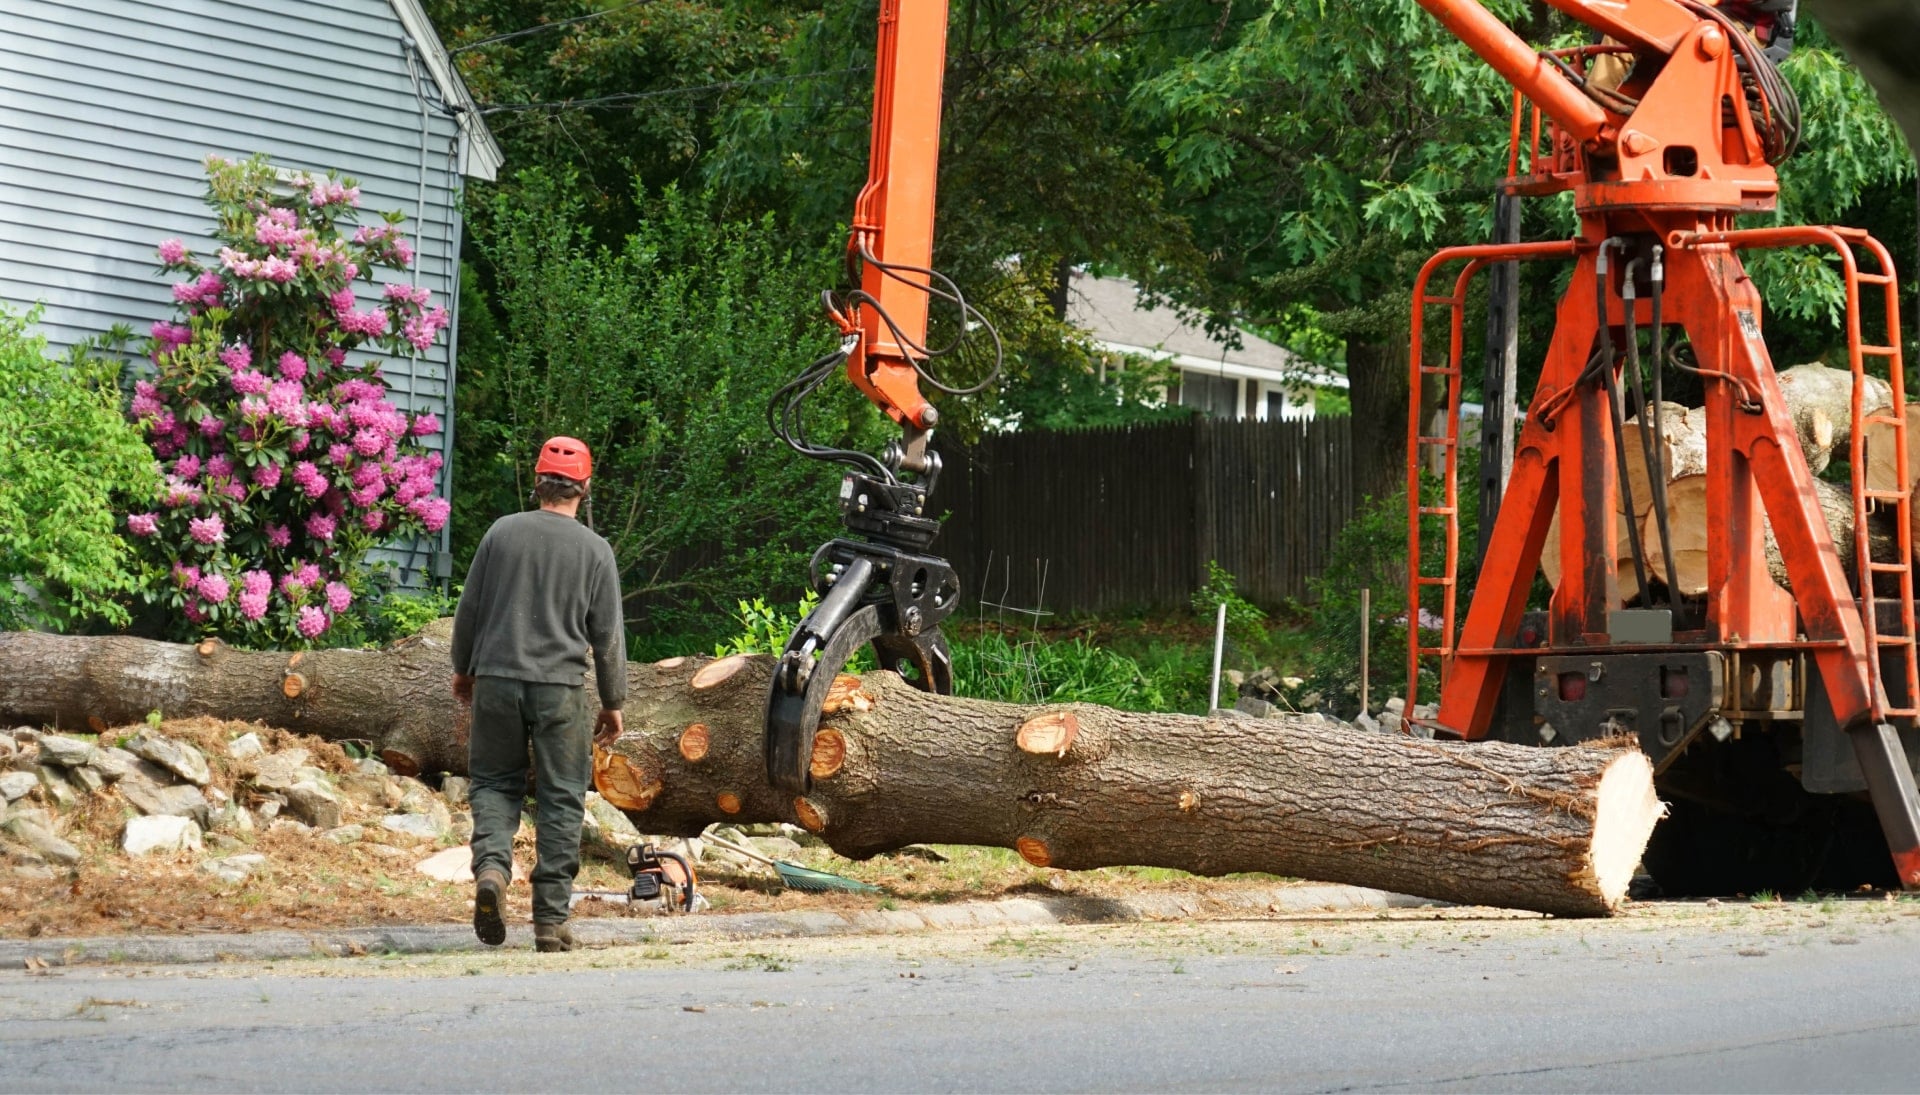 A tree stump has fallen and needs tree removal services in Fairfield, CA.